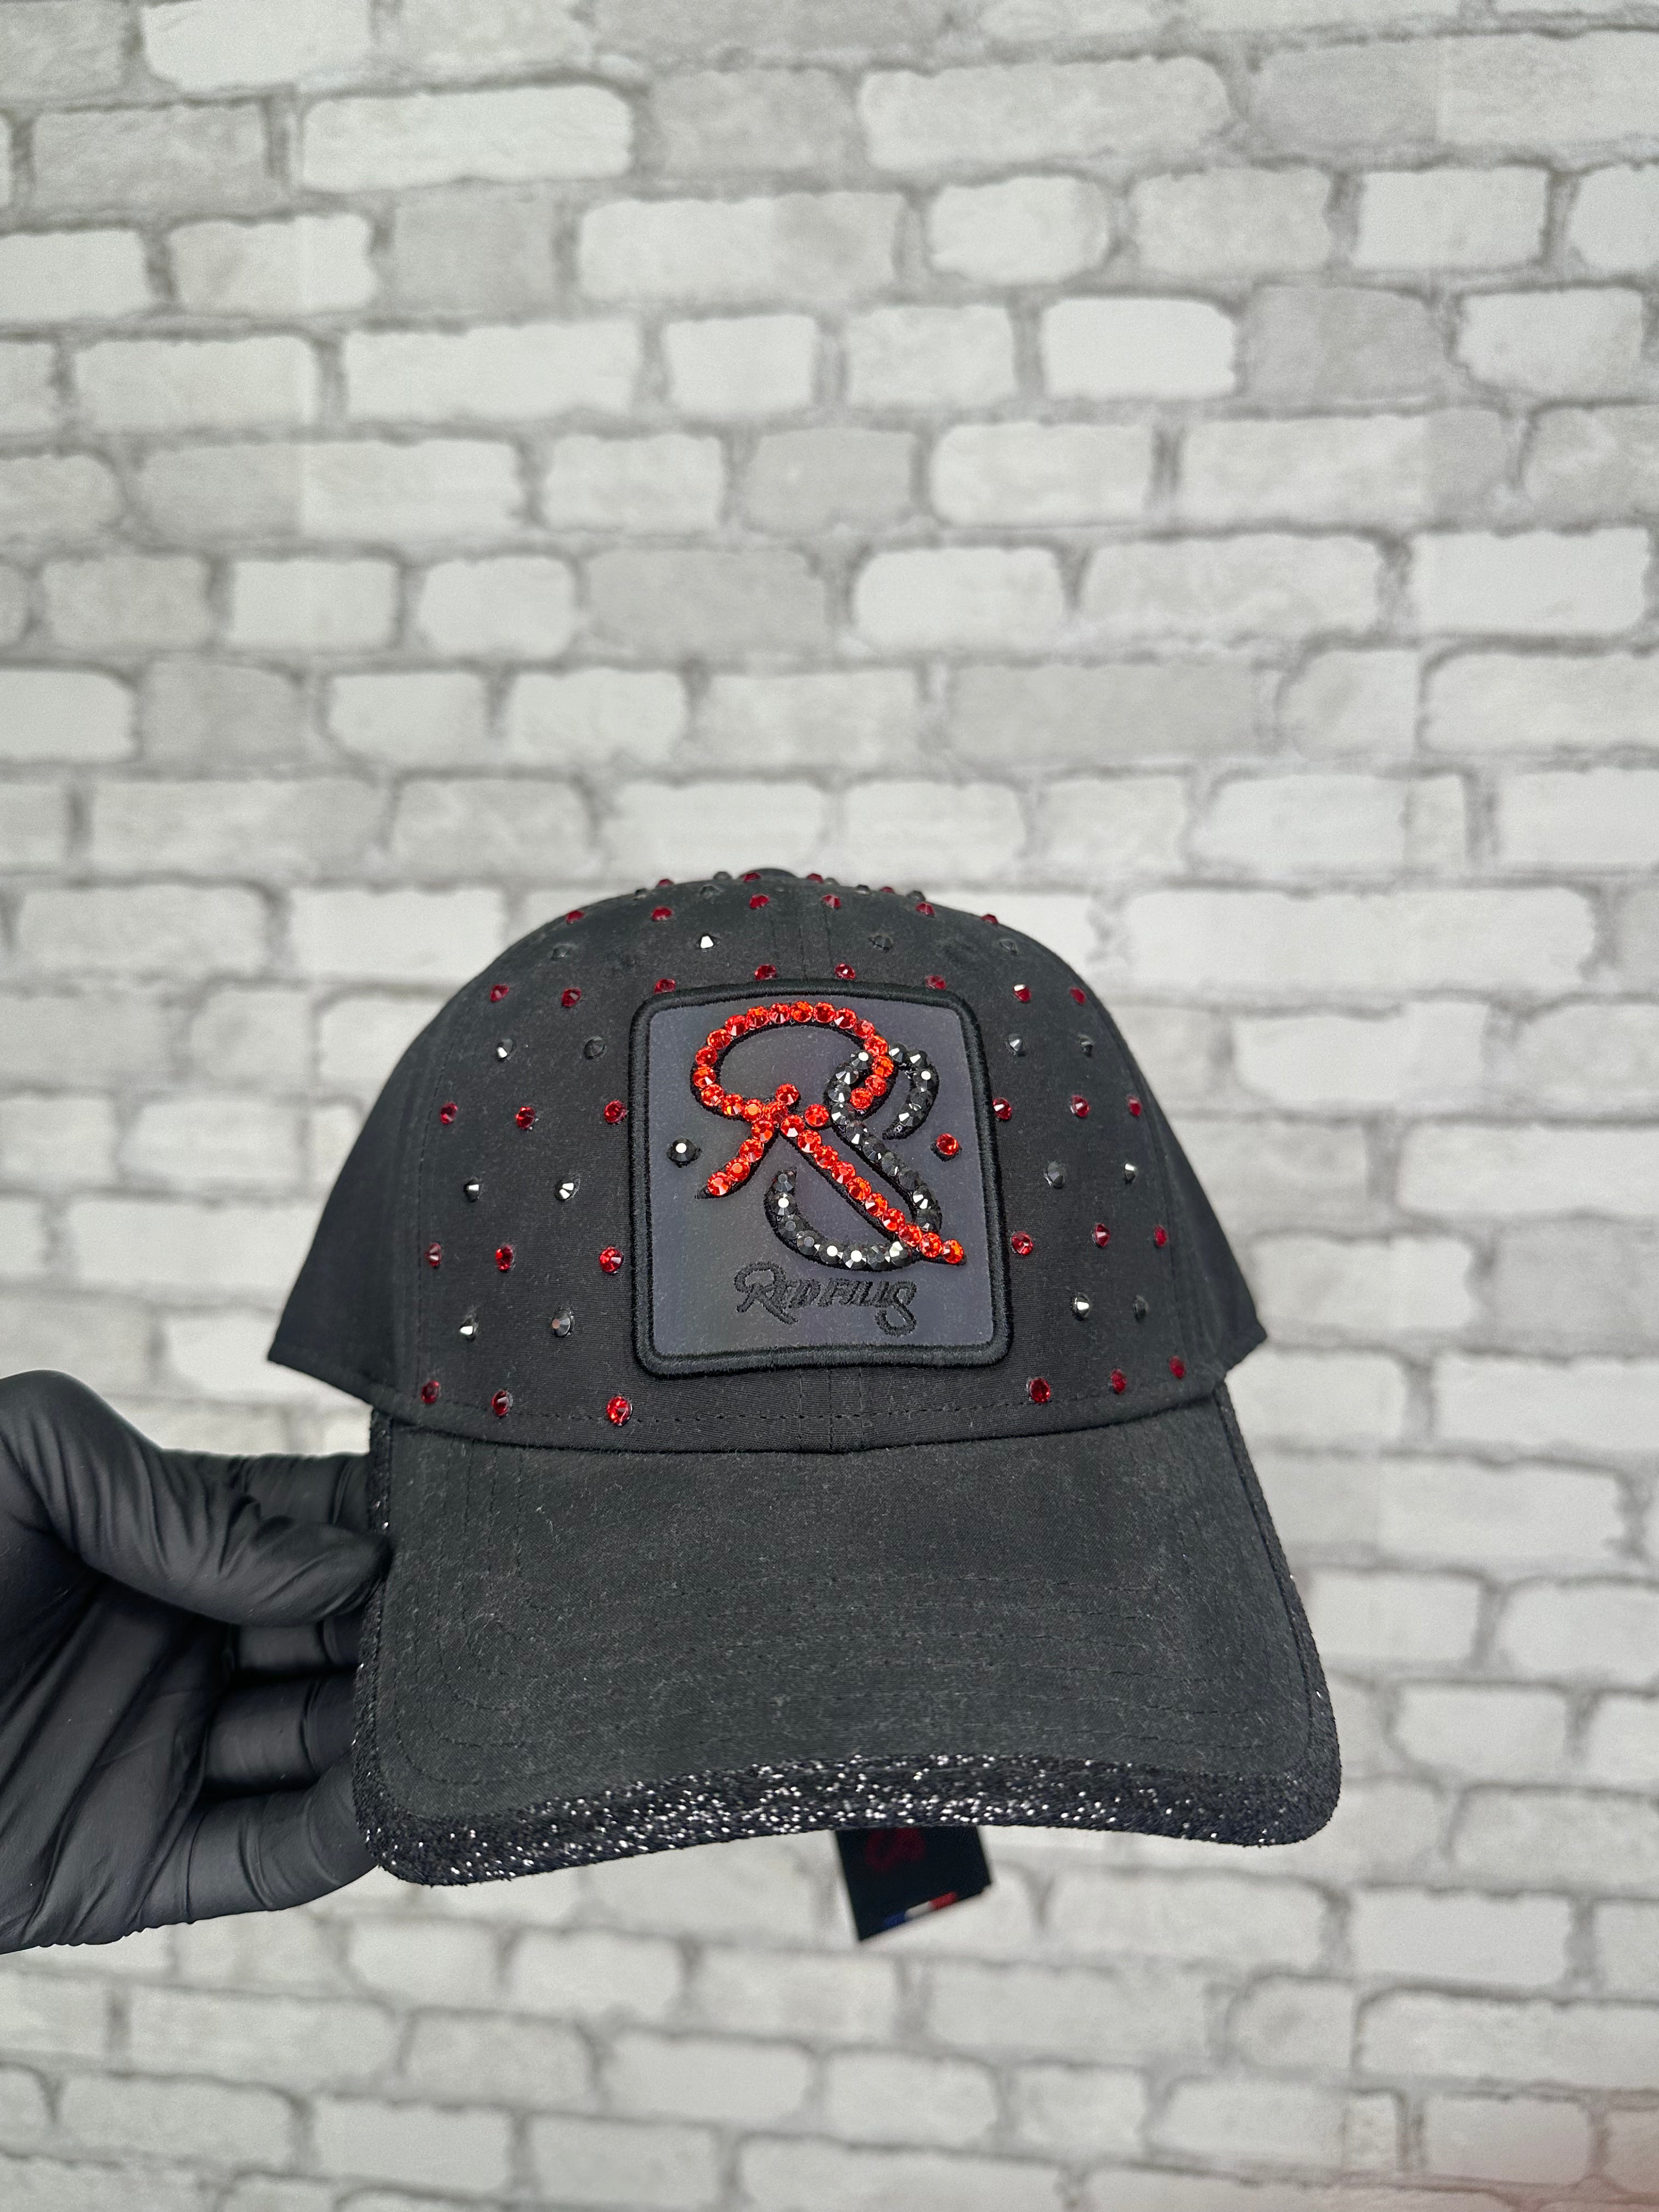 Redfills - Casquette RS Rubis Deluxe